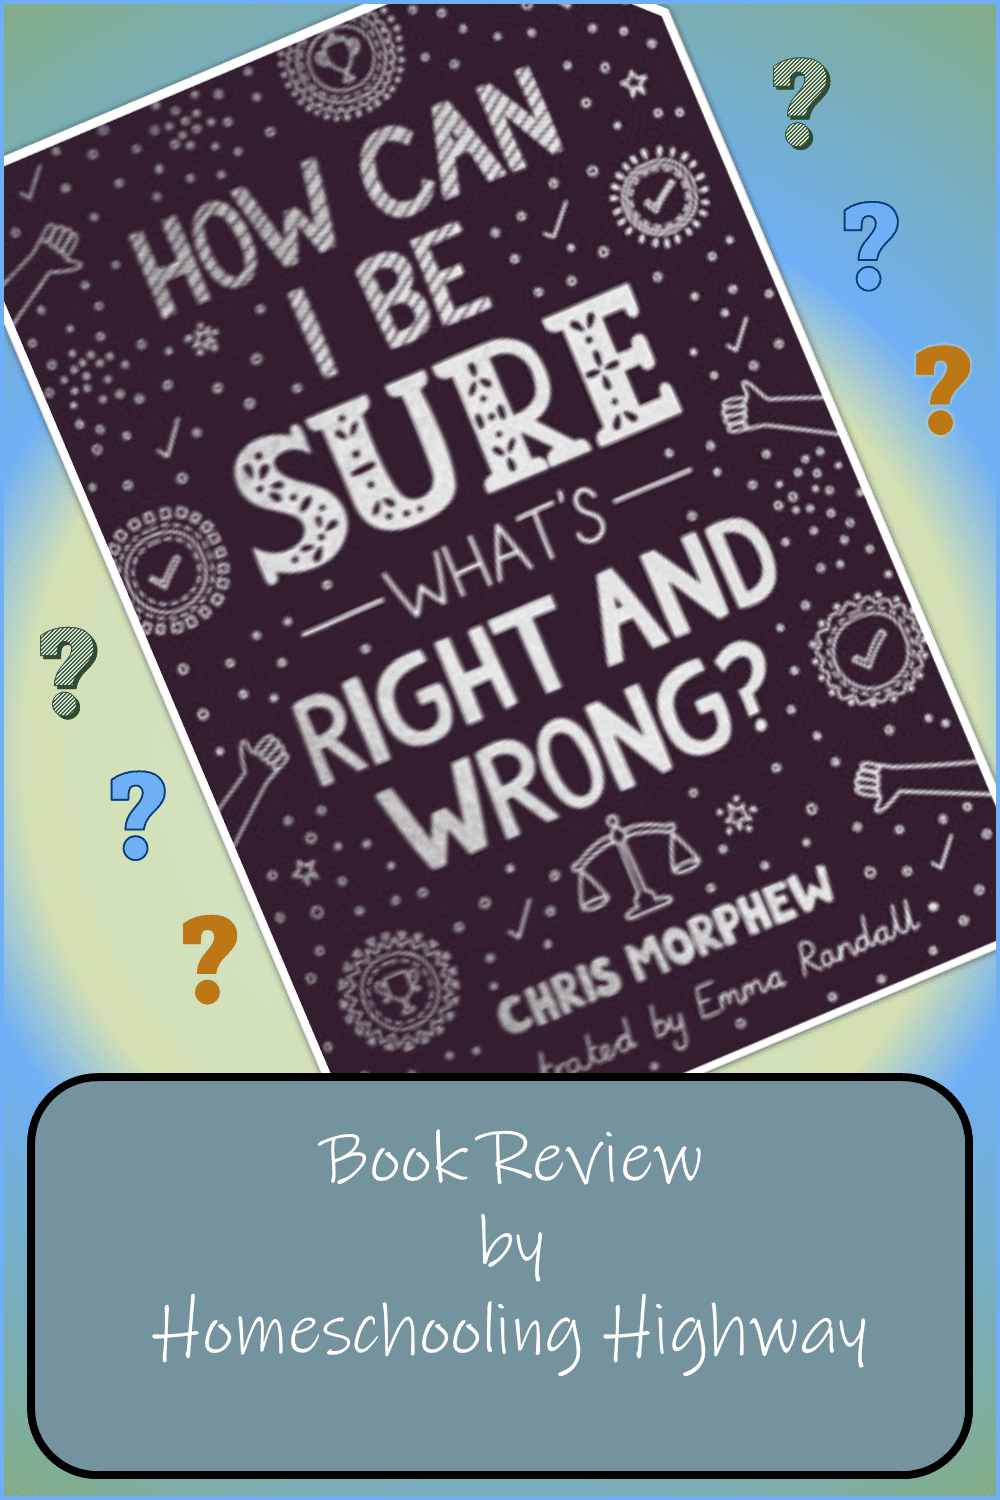 How Can I Be Sure What's Right and Wrong? By Chris Morphew. Book Reviewed by Homeschooling Highway